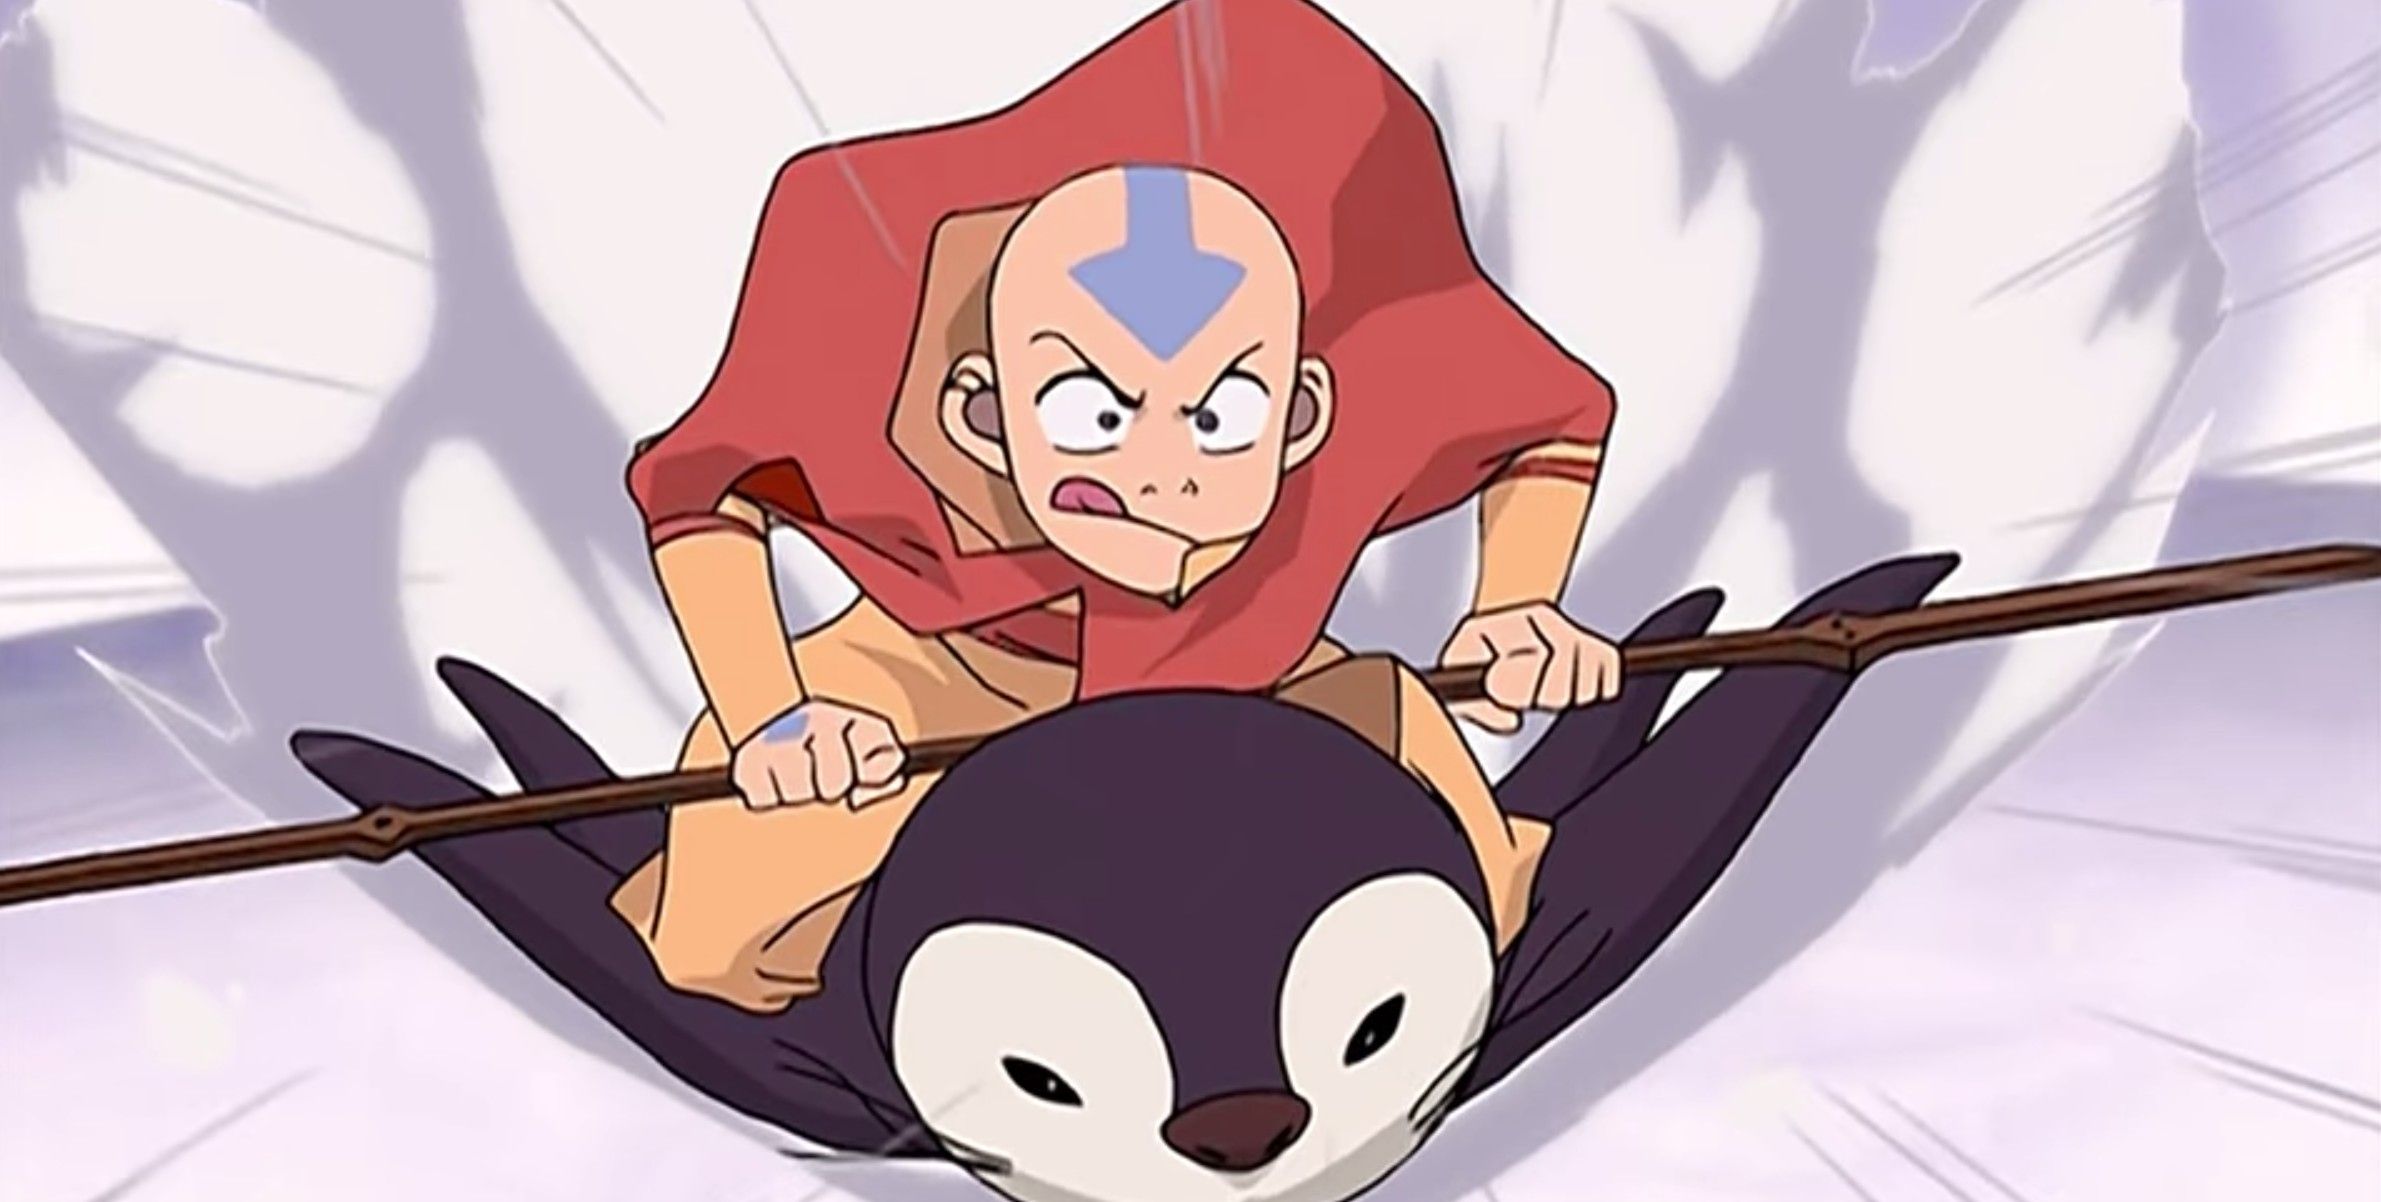 Aang Penguin Sleds in Avatar The Last Airbender